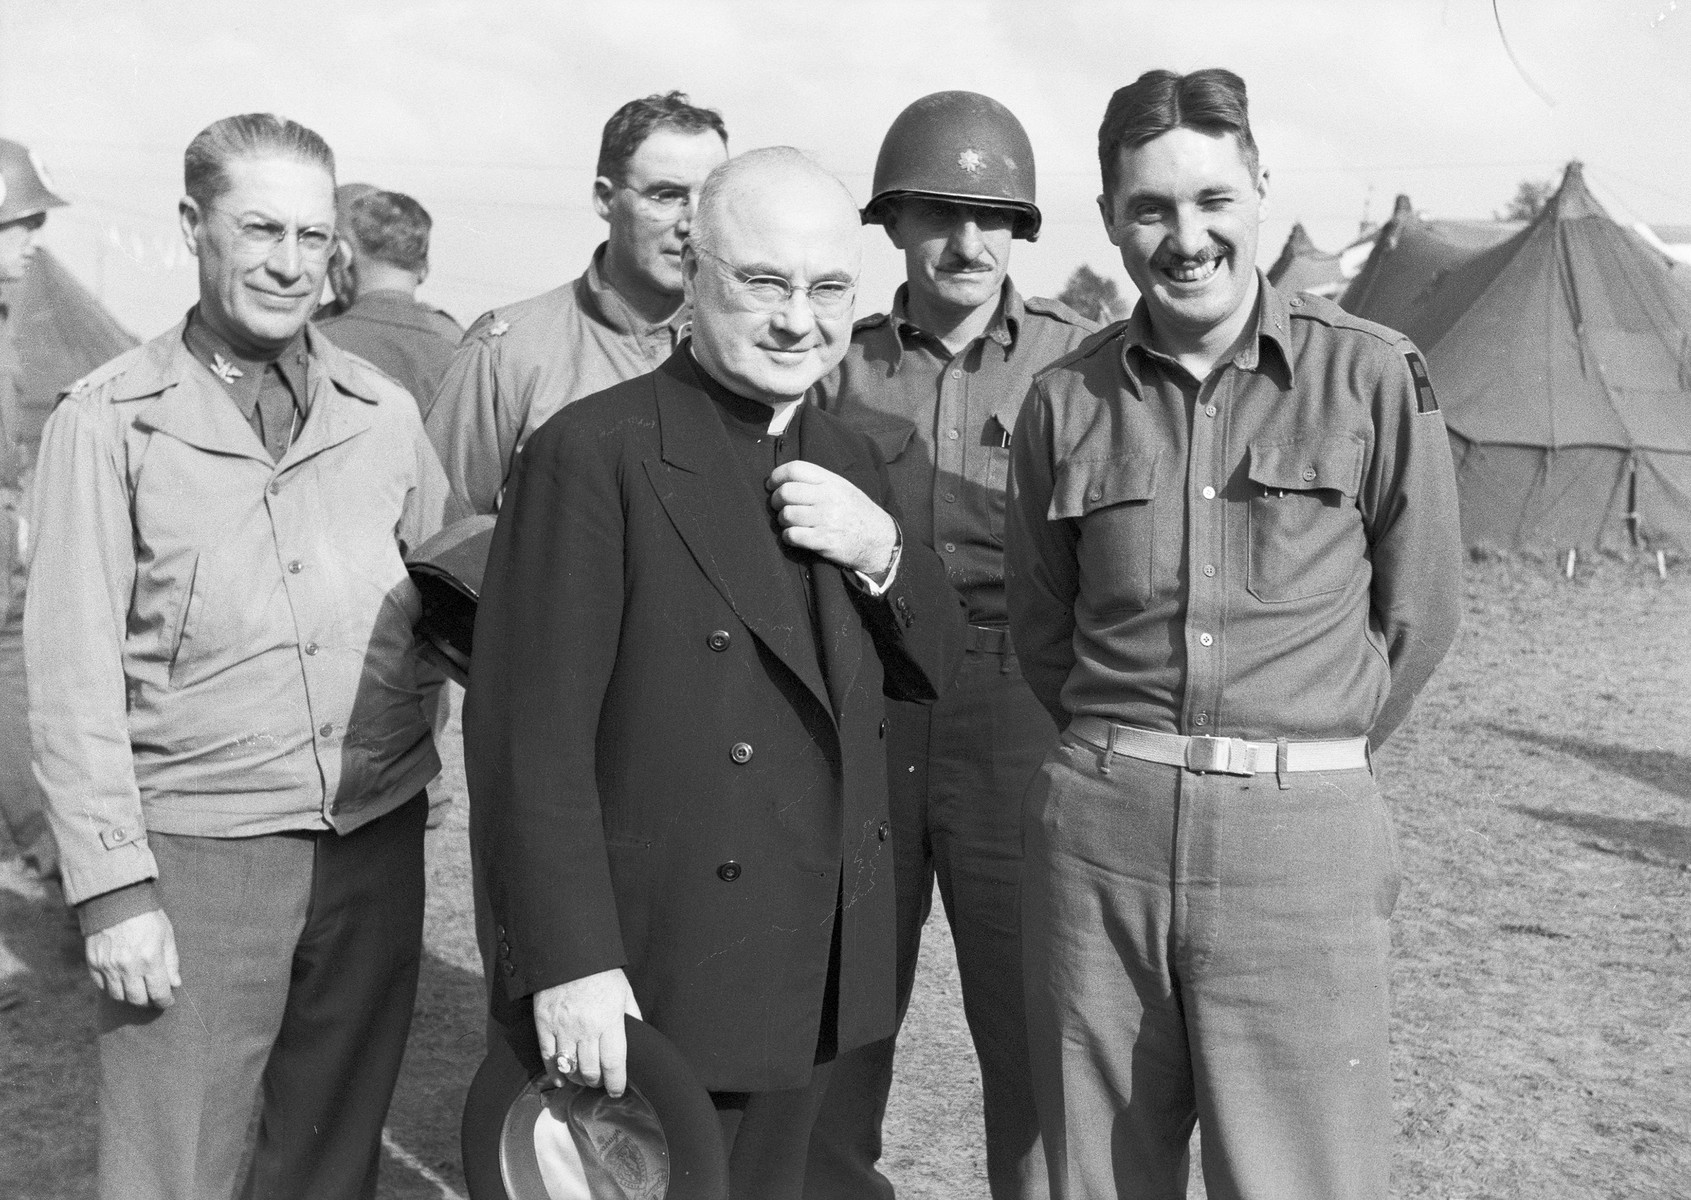 Archbishop Francis J. Spellman poses with American servicemen after the Invasion of Normandy.  

Spellman, as military vicar of the United States armed forces, traveled extensively throughout WWII.  During this time he met with military leaders and heads of state, bas well as American servicemen fighting in all theaters of the war.